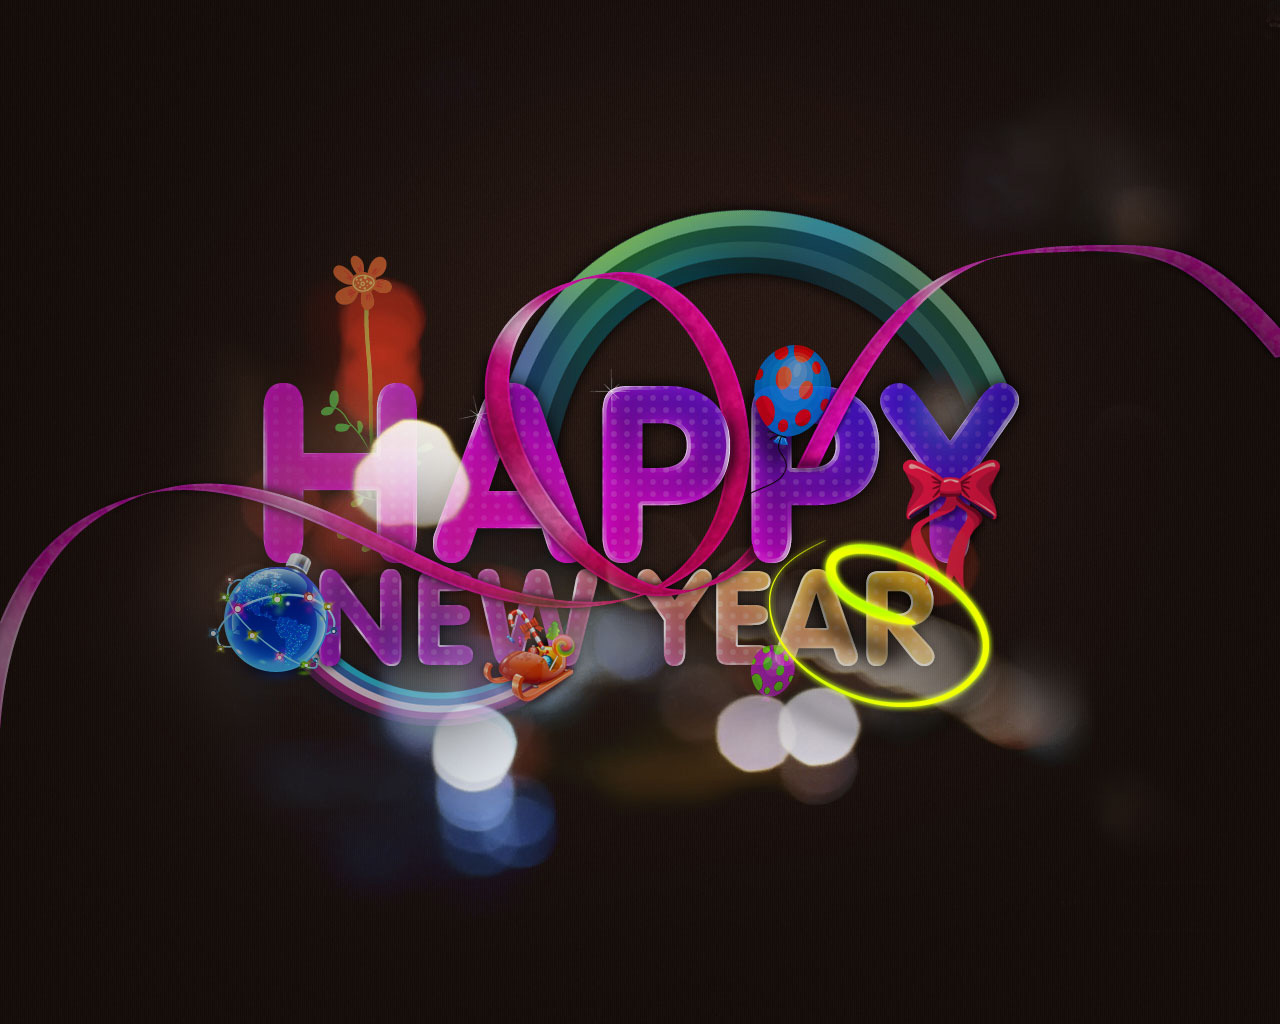 Lovely New Year 2010 Wallpapers | HD Wallpapers